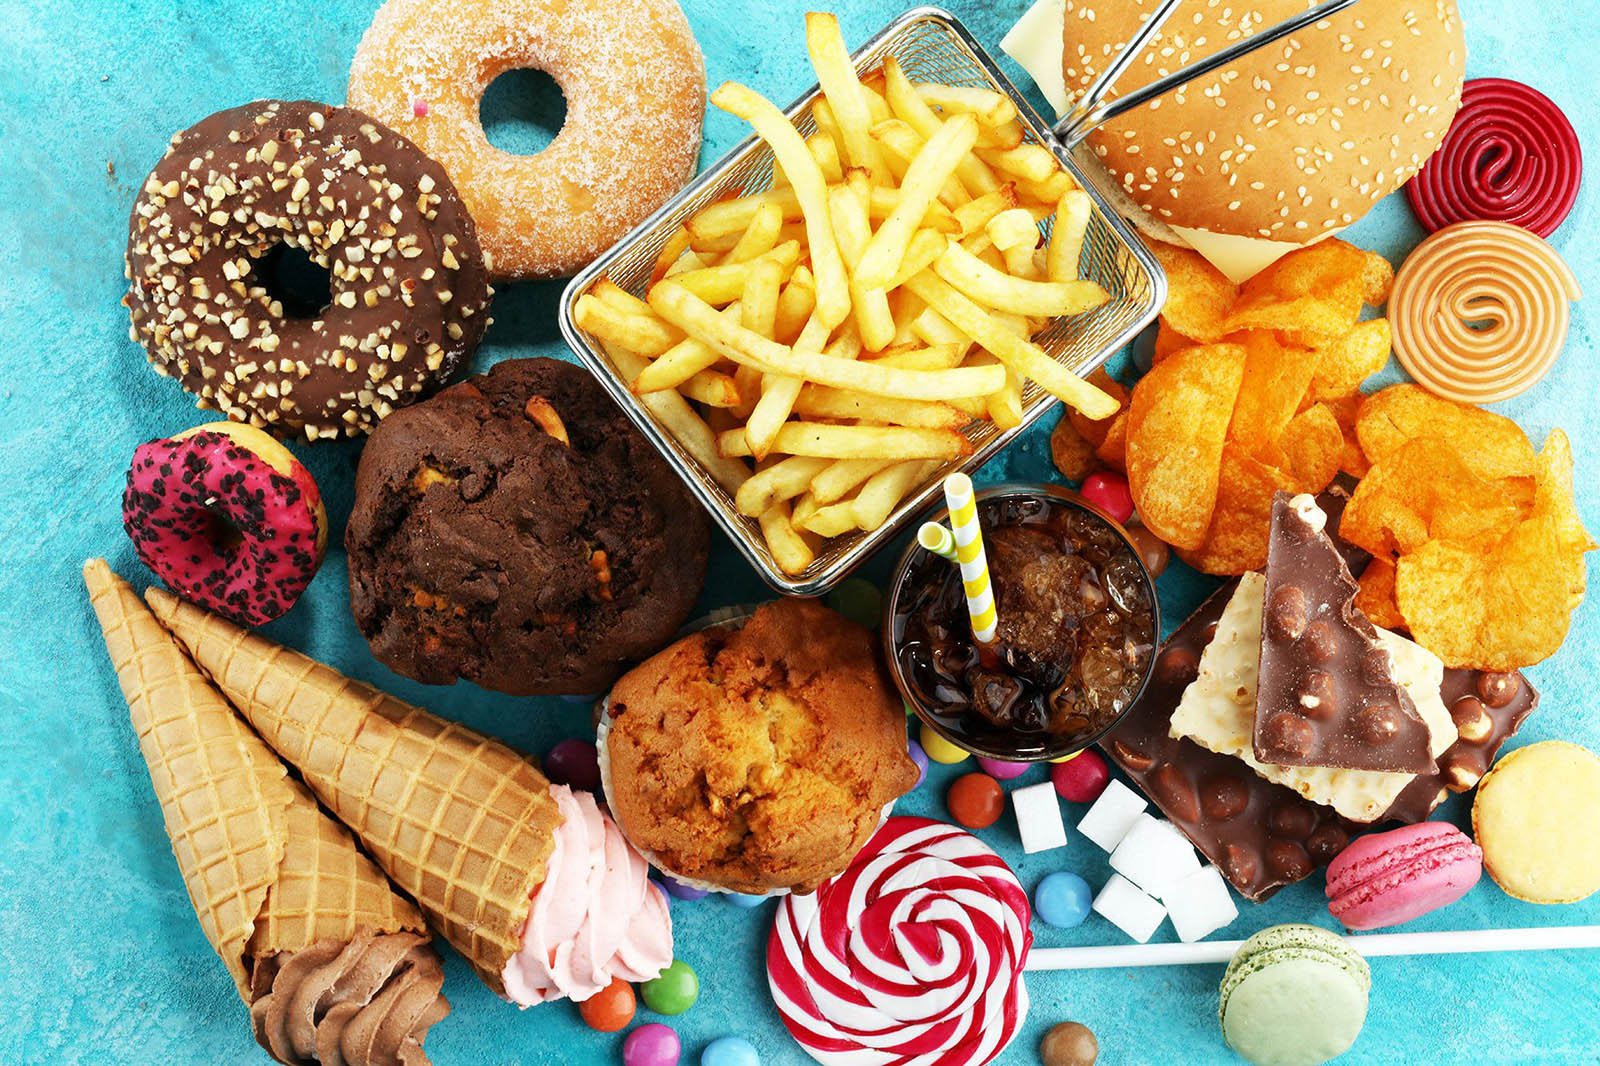 🍔 Feast on Nothing but Junk Food and We’ll Reveal Your True Personality Type Junk Food Fast Food Snacks